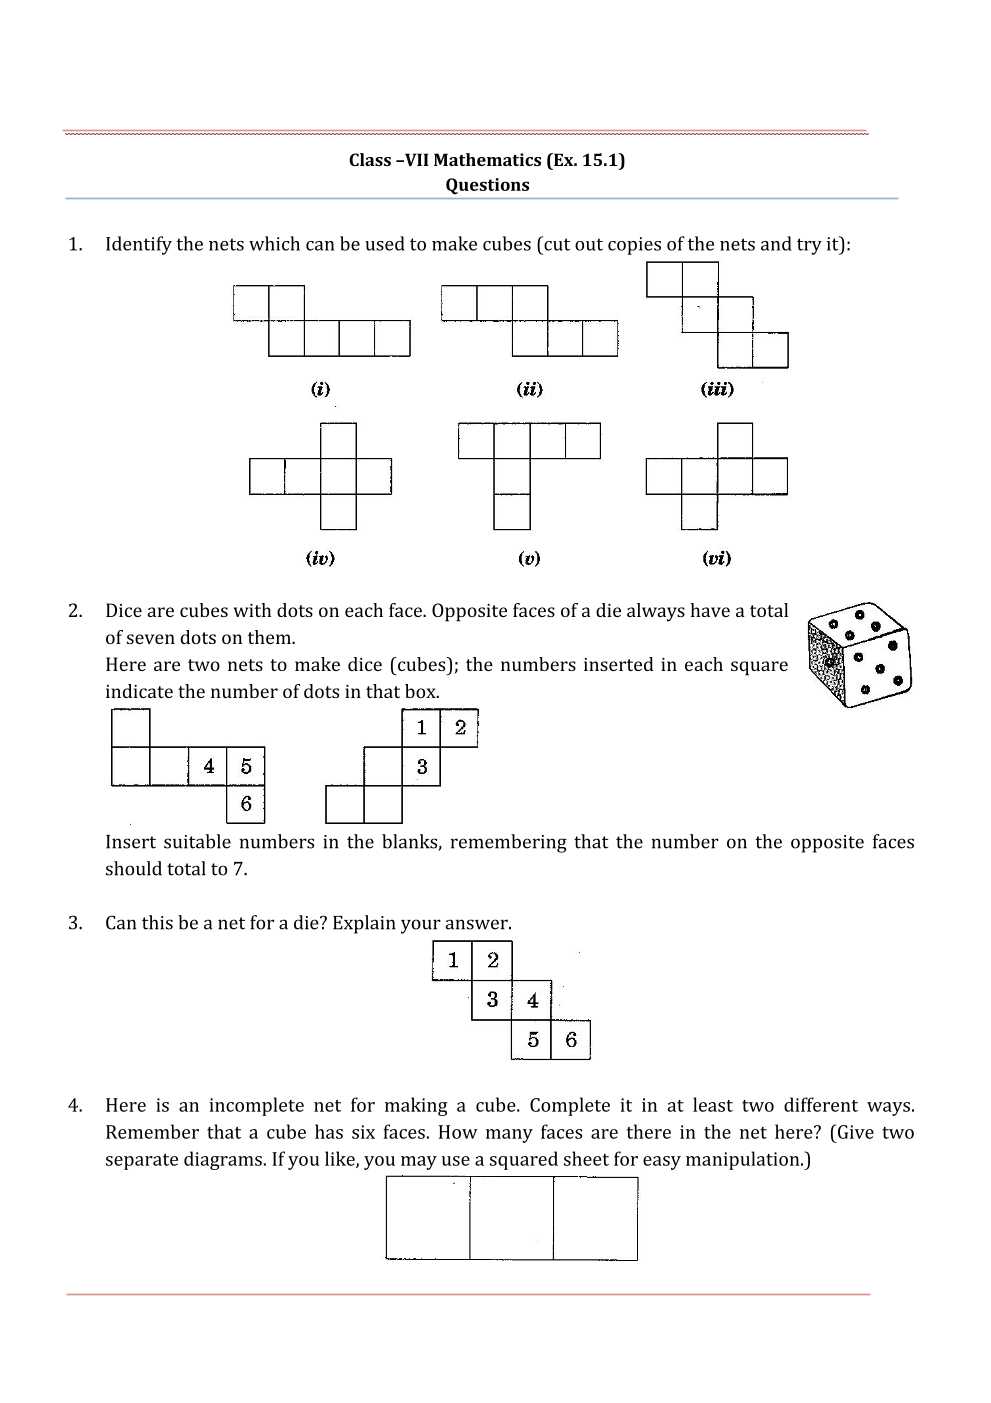 NCERT Solutions For Class 7 Maths Chapter 15 Visualising Solid Shapes